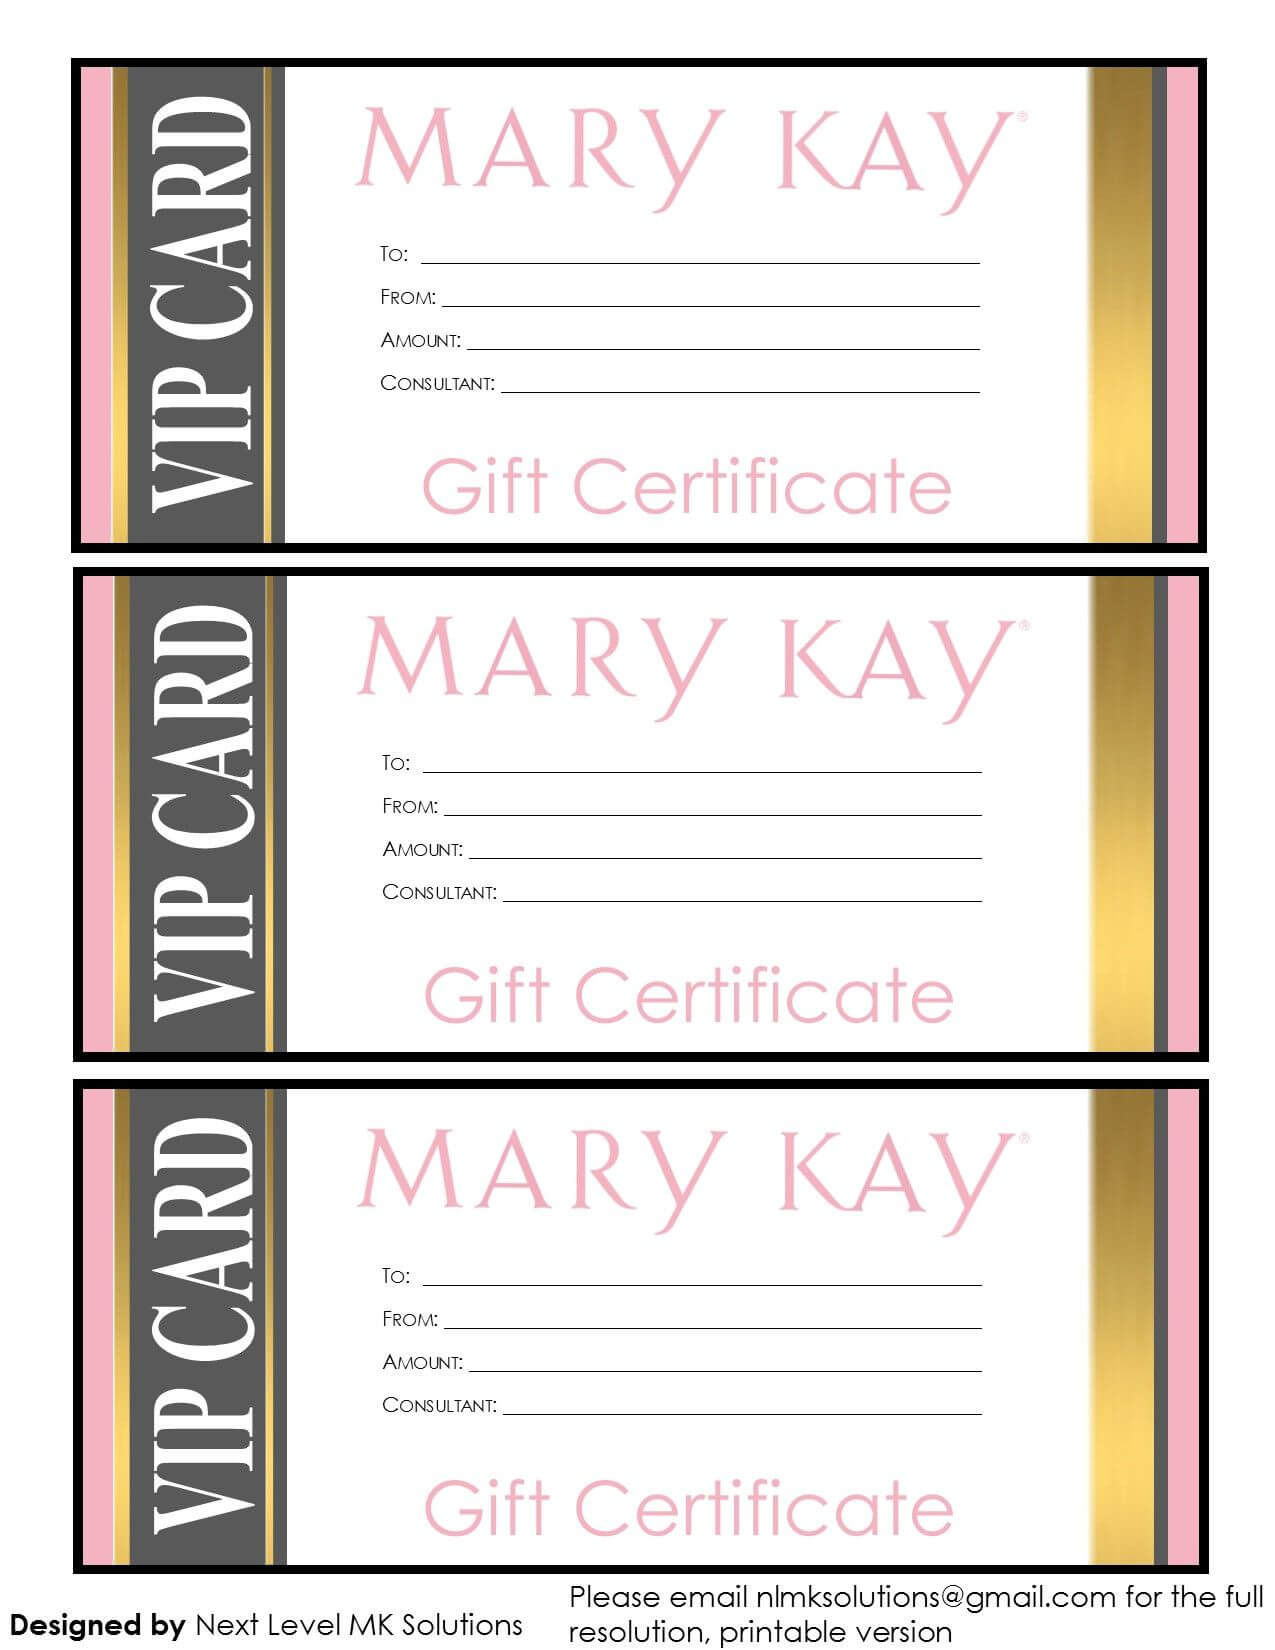 Mary Kay Gift Certificates - Please Email For The Full Pdf Throughout Mary Kay Gift Certificate Template